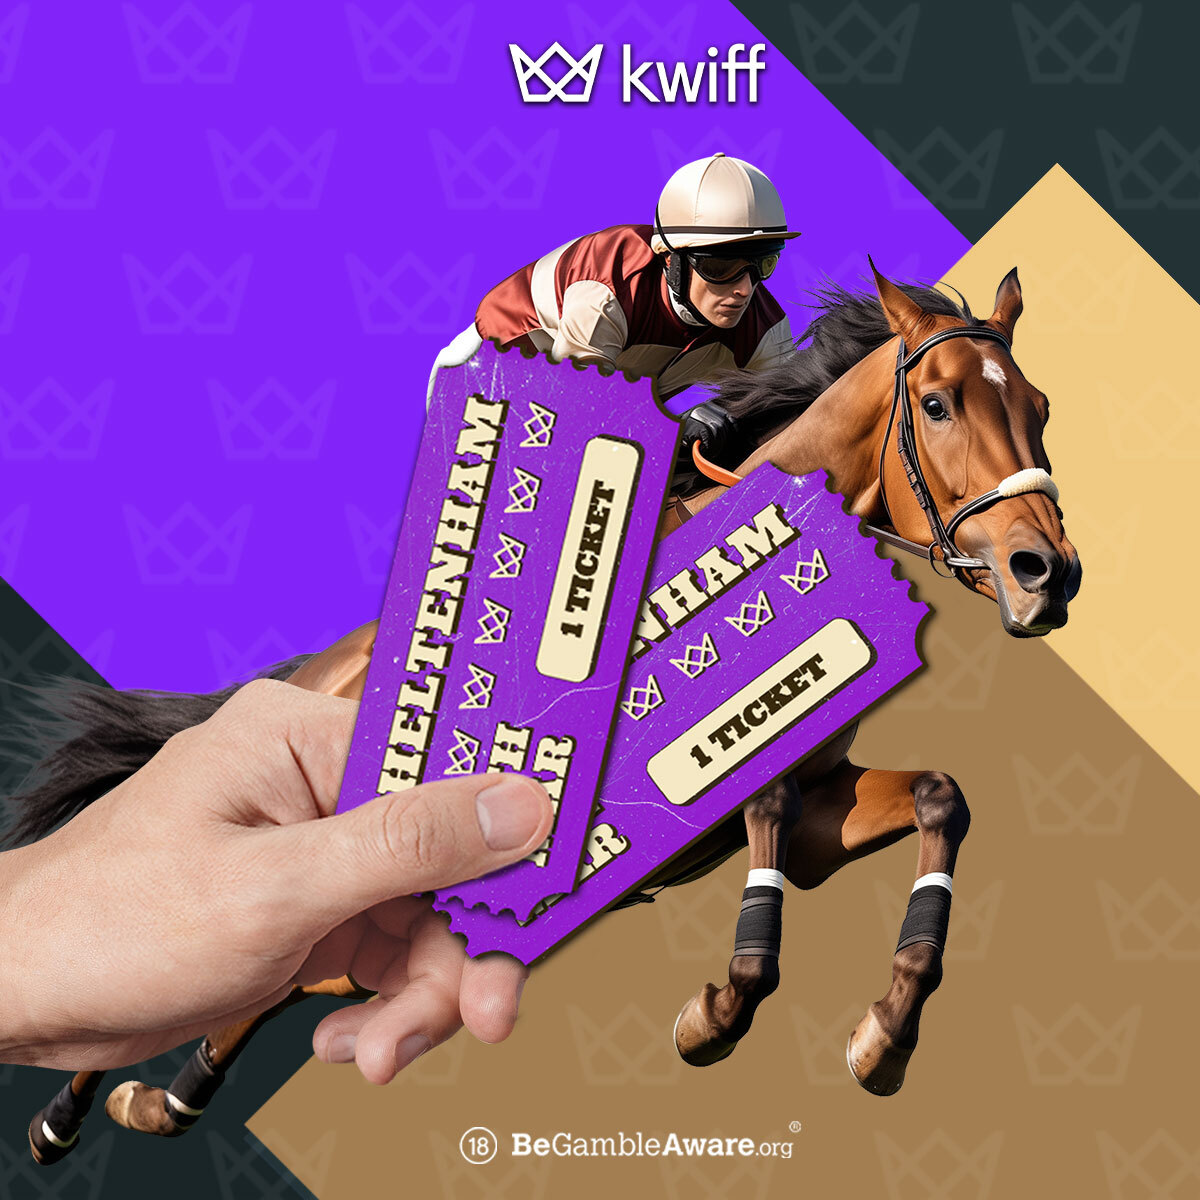 Cheltenham Ticket Giveaway! WIN a pair of tickets to Gold Cup Day at The Cheltenham Festival! RT this and follow @KwiffOfficial to enter! Good luck! 🏆 Terms 👉 promo.kwiff.com/gold-cup-ticke…